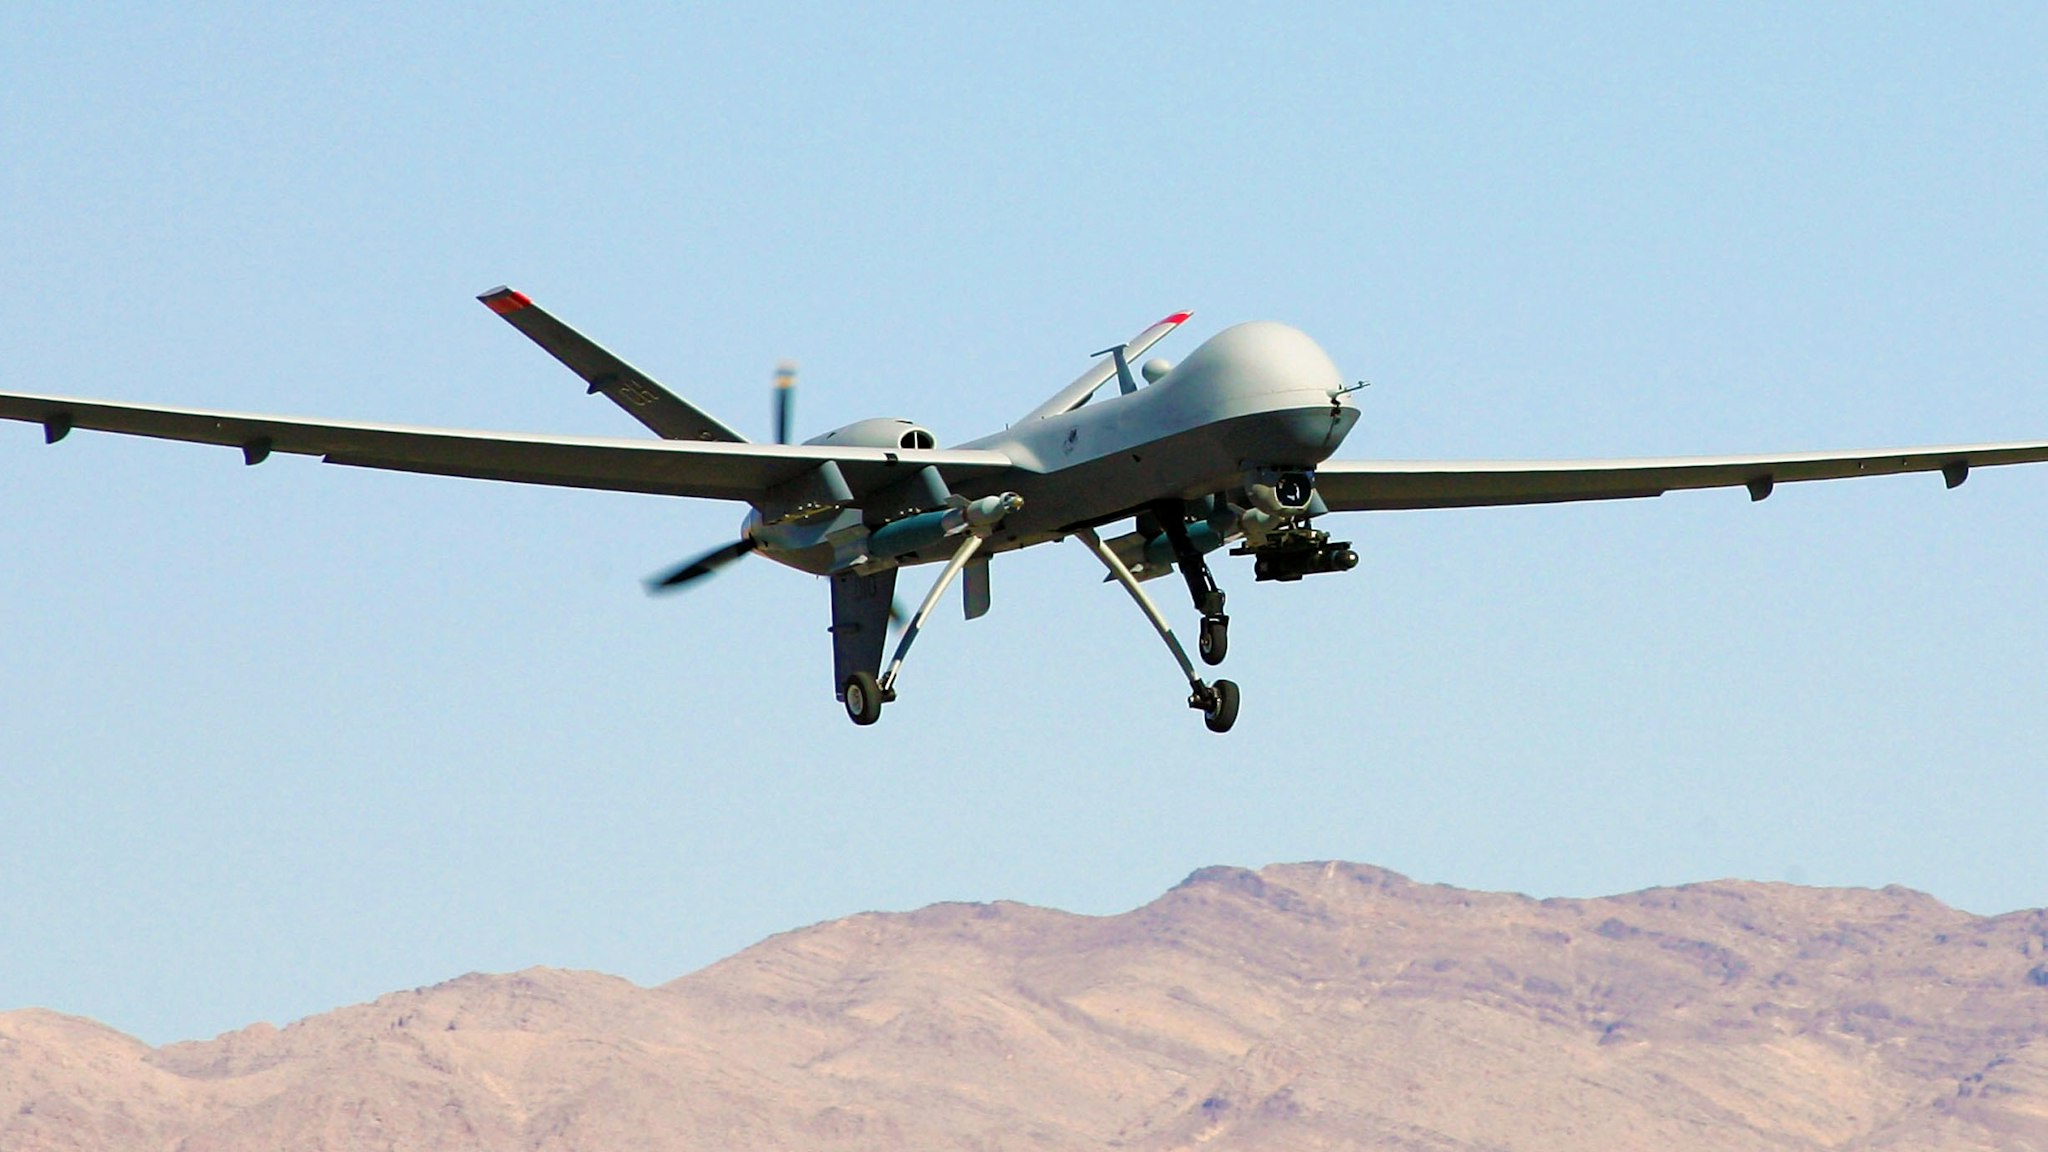 CREECH AIR FORCE BASE, NV - AUGUST 08: An MQ-9 Reaper takes off August 8, 2007 at Creech Air Force Base in Indian Springs, Nevada. The Reaper is the Air Force's first "hunter-killer" unmanned aerial vehicle (UAV), designed to engage time-sensitive targets on the battlefield as well as provide intelligence and surveillance. The jet-fighter sized Reapers are 36 feet long with 66-foot wingspans and can fly for up to 14 hours fully loaded with laser-guided bombs and air-to-ground missiles. They can fly twice as fast and high as the smaller MQ-1 Predators, reaching speeds of 300 mph at an altitude of up to 50,000 feet. The aircraft are flown by a pilot and a sensor operator from ground control stations. The Reapers are expected to be used in combat operations by the U.S. military in Afghanistan and Iraq within the next year.